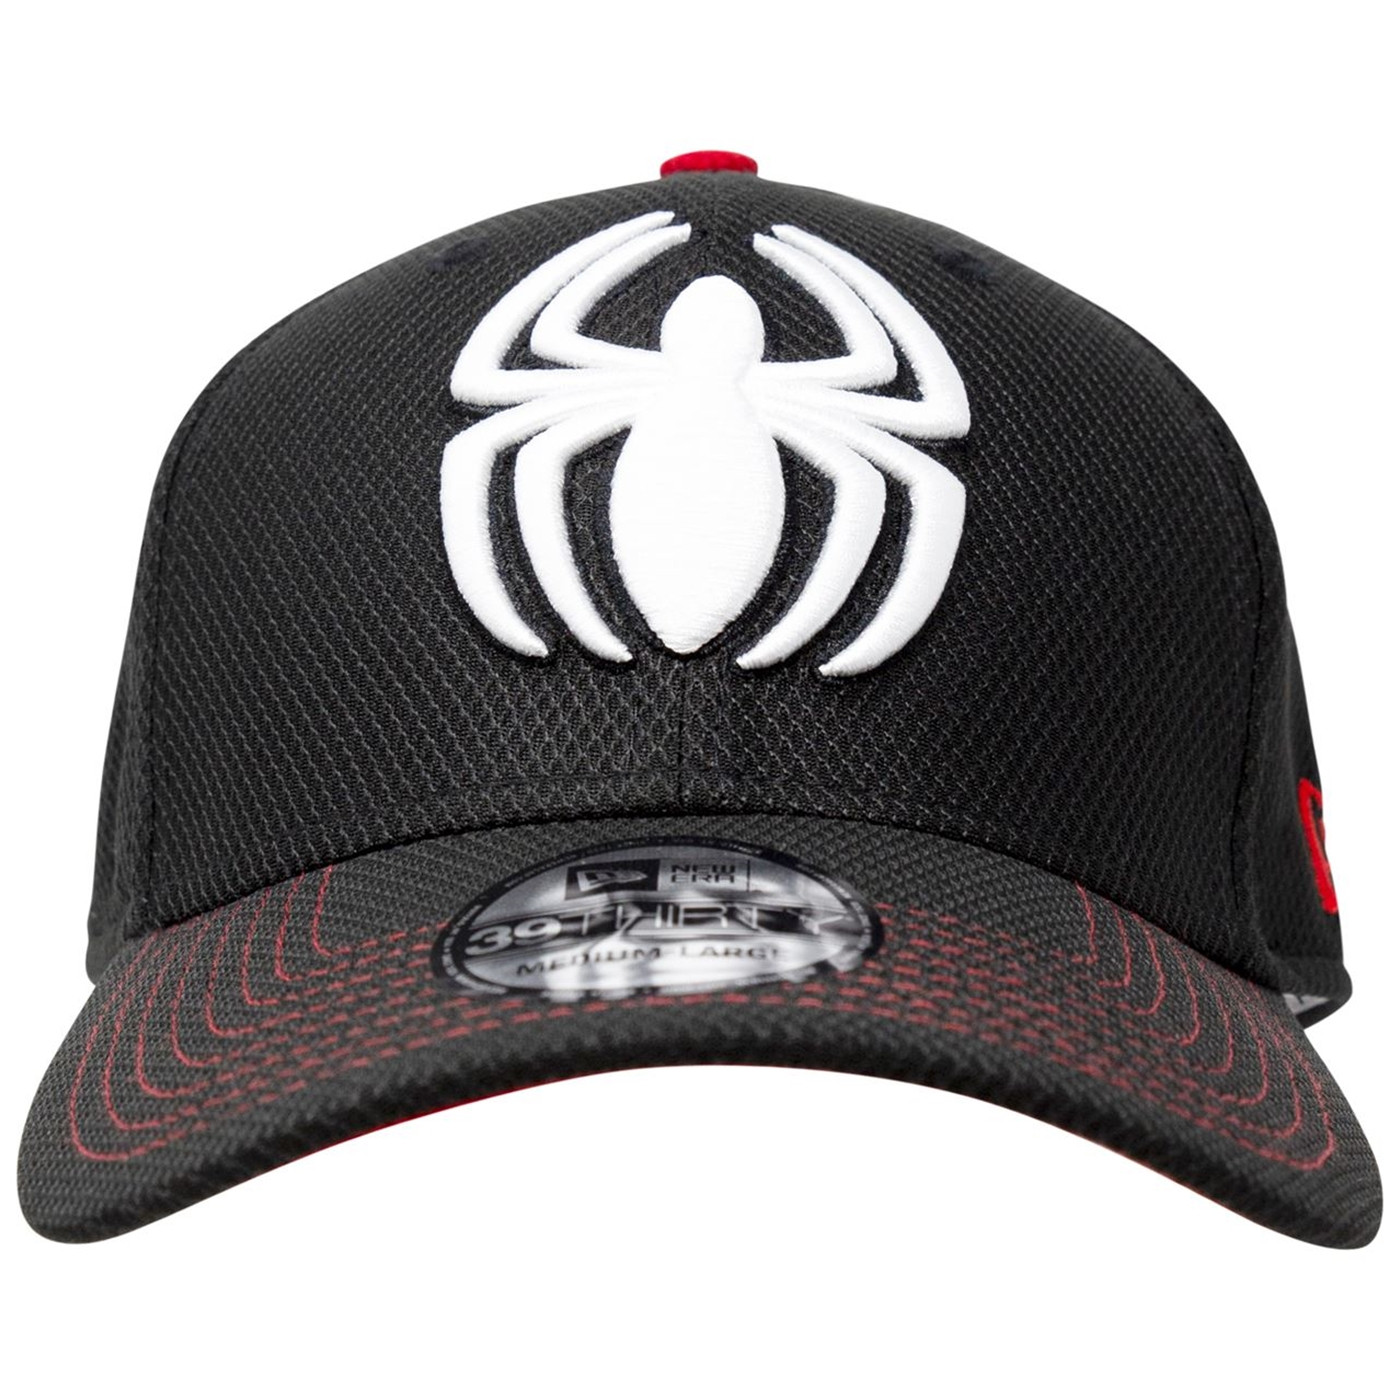 Spider-Man Stealth Suit Armor New Era 39Thirty Flex Fitted Hat